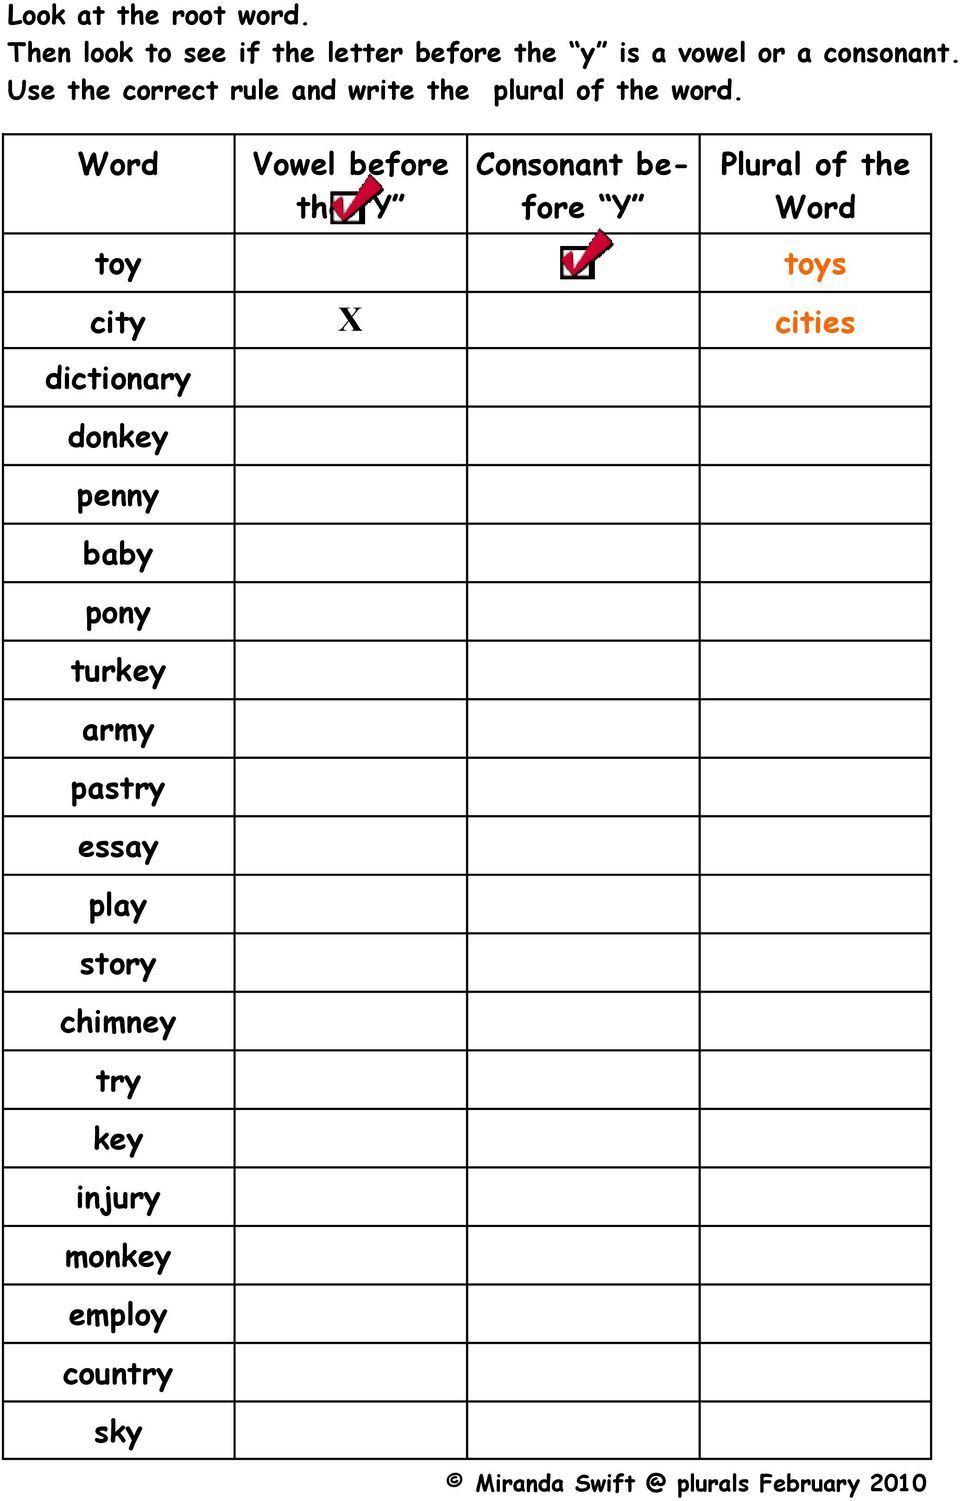 Word Vowel before the Y Cononant before Y Plural of the Word toy X toy city X cit dictionary